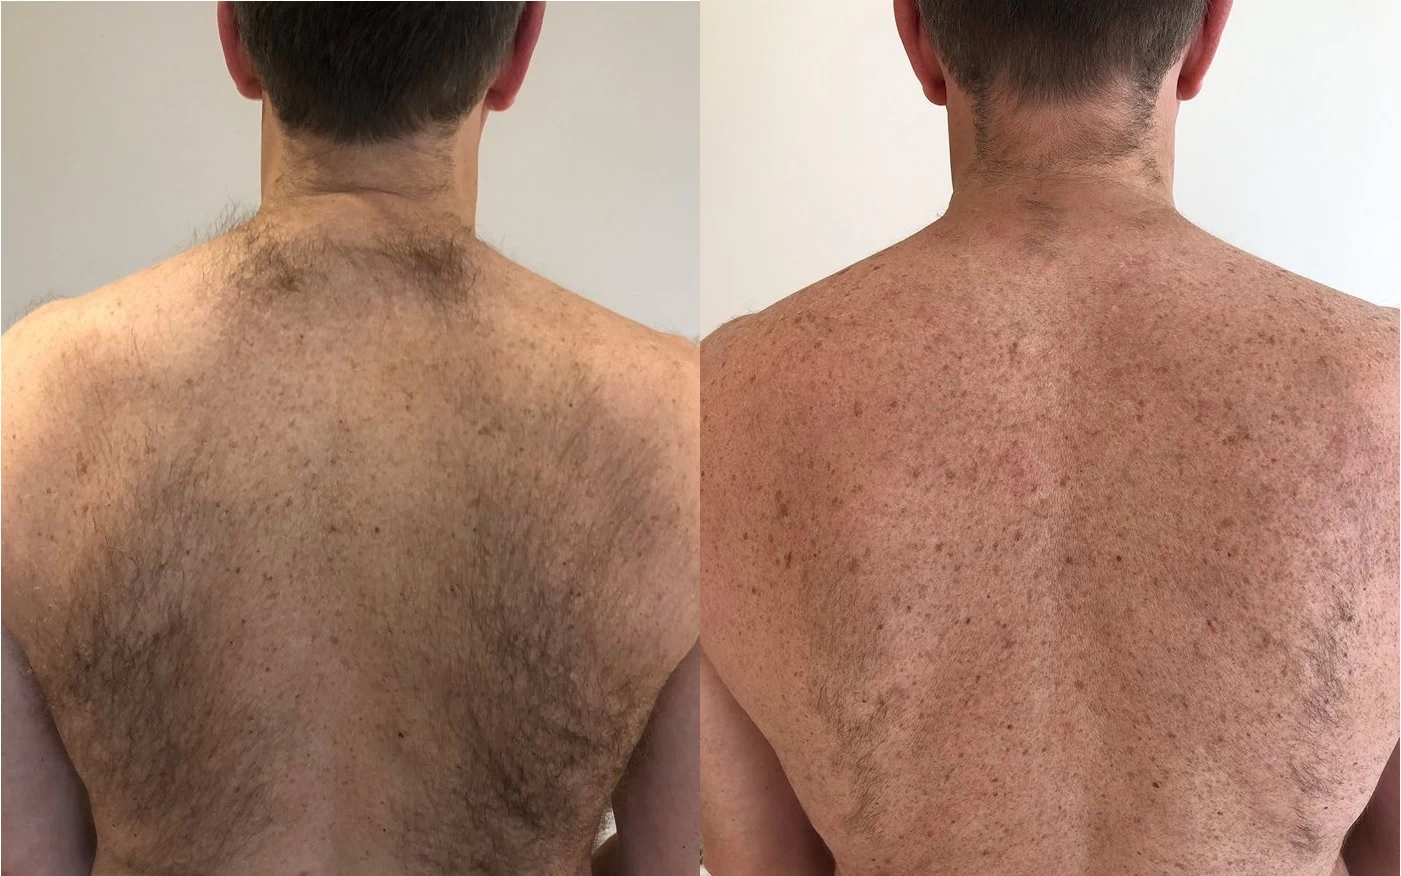 Reduced hair after laser hair removal on back